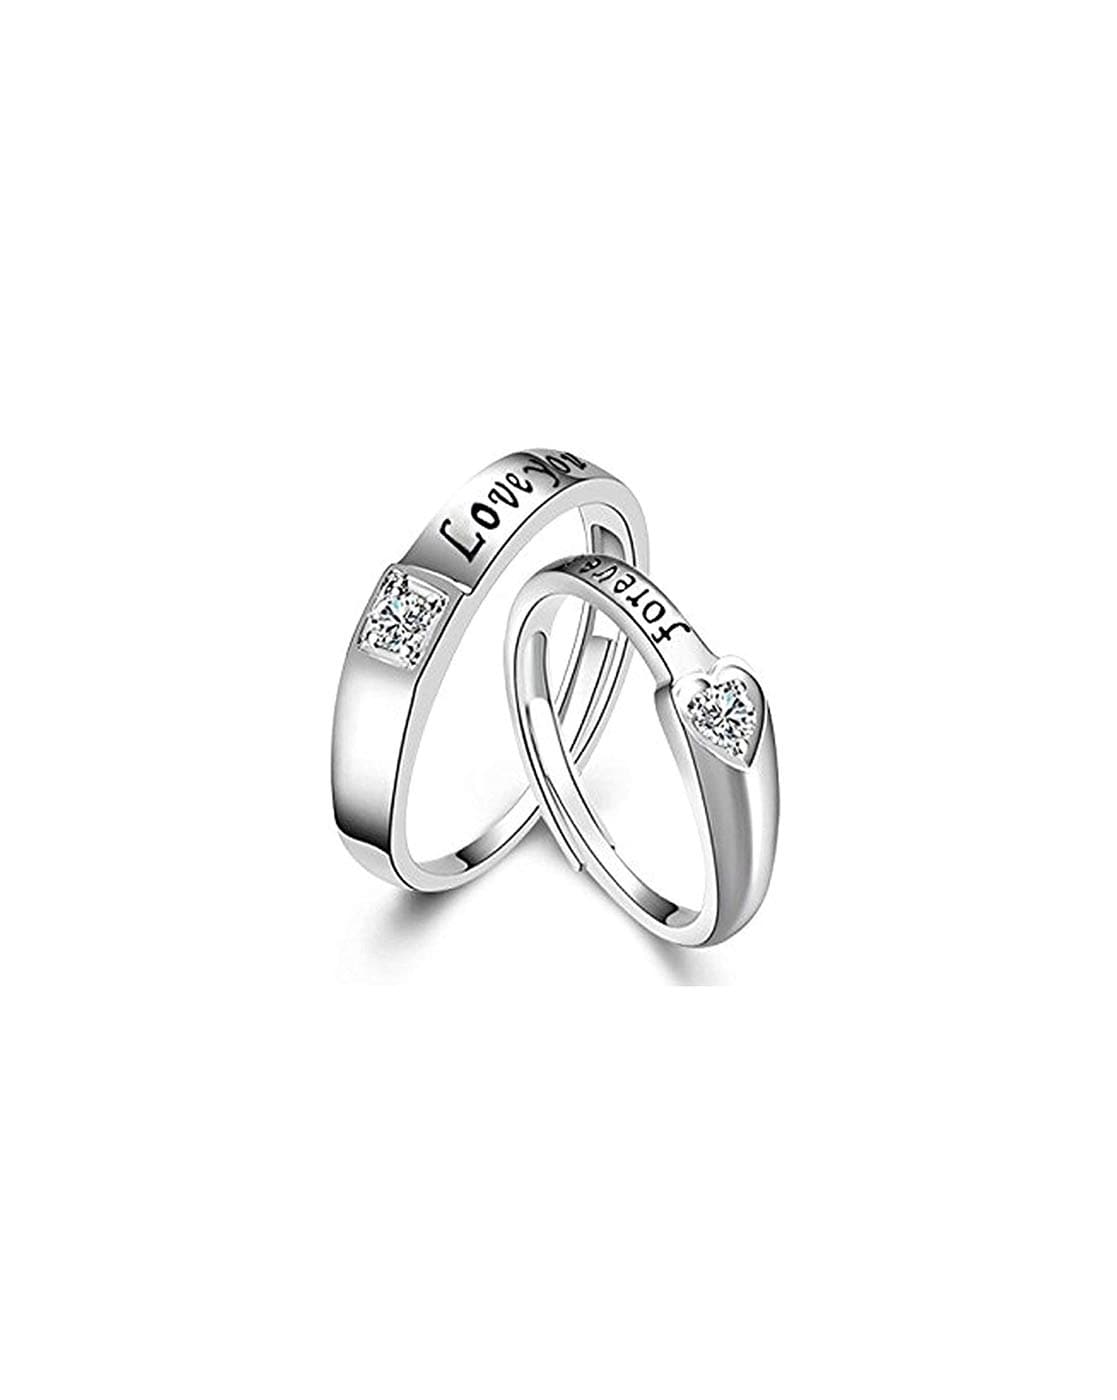 Crown Design Silver Couple Ring